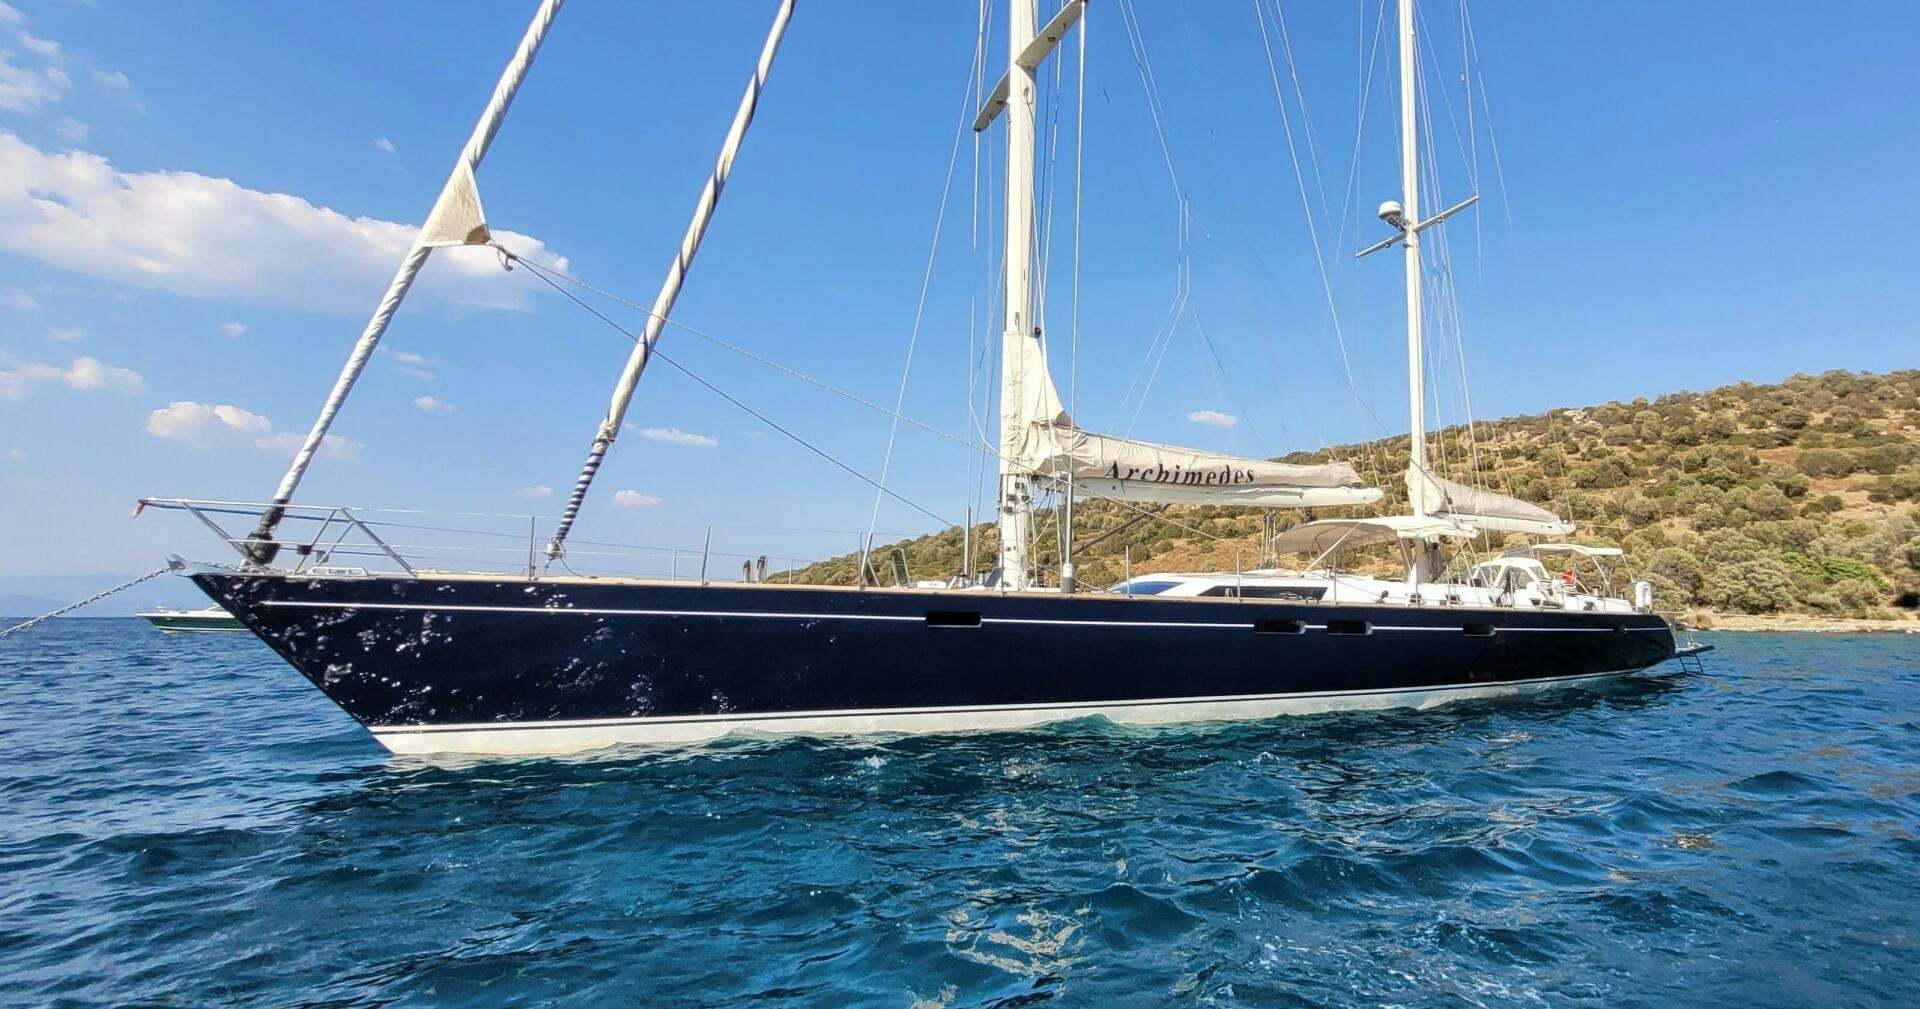 Archimedes
Yacht for Sale